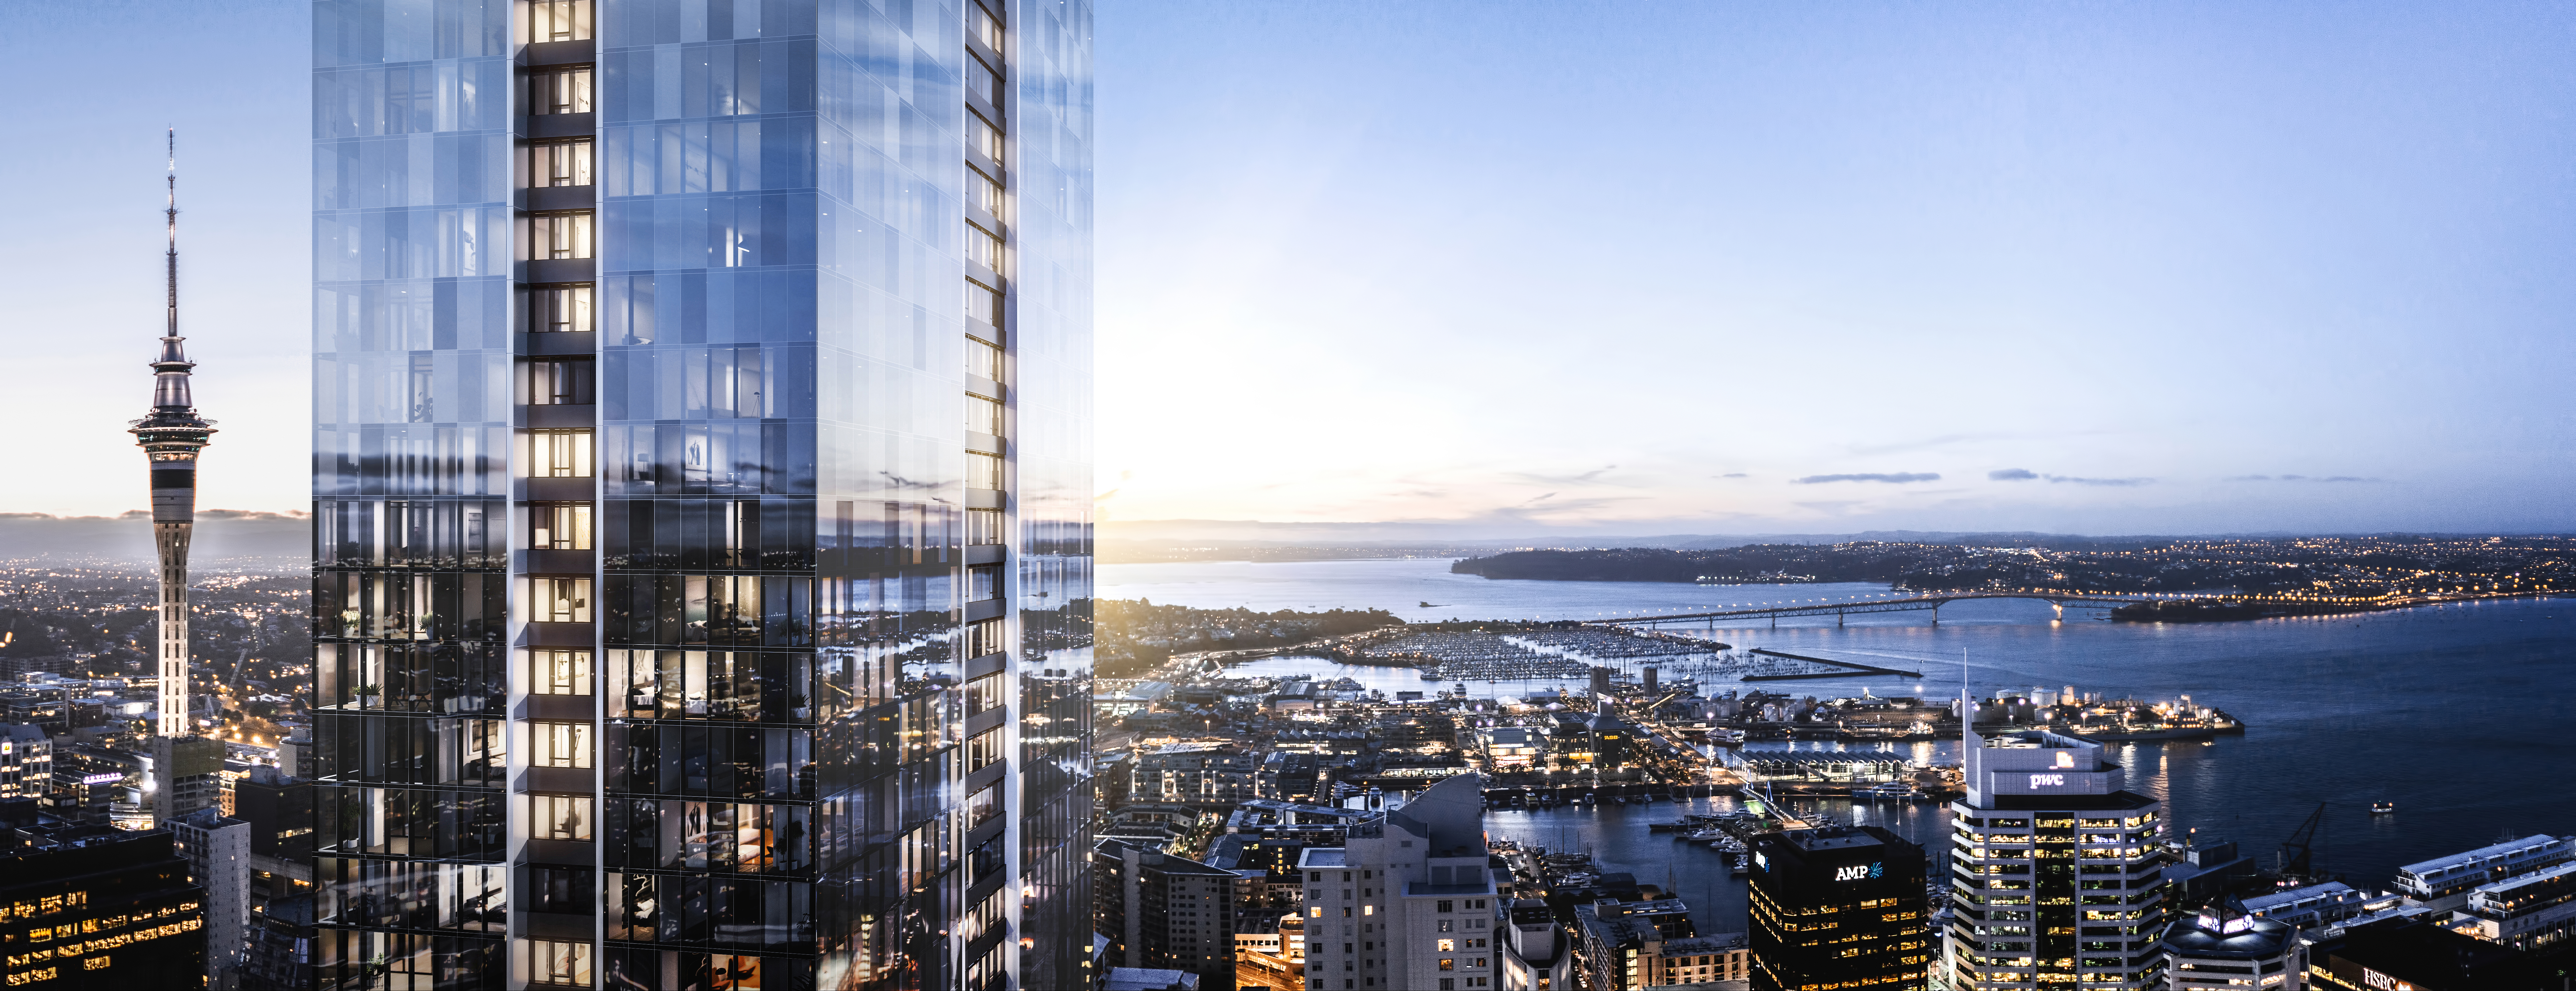 Plans for Pacifica, projected onto Auckland's skyline.